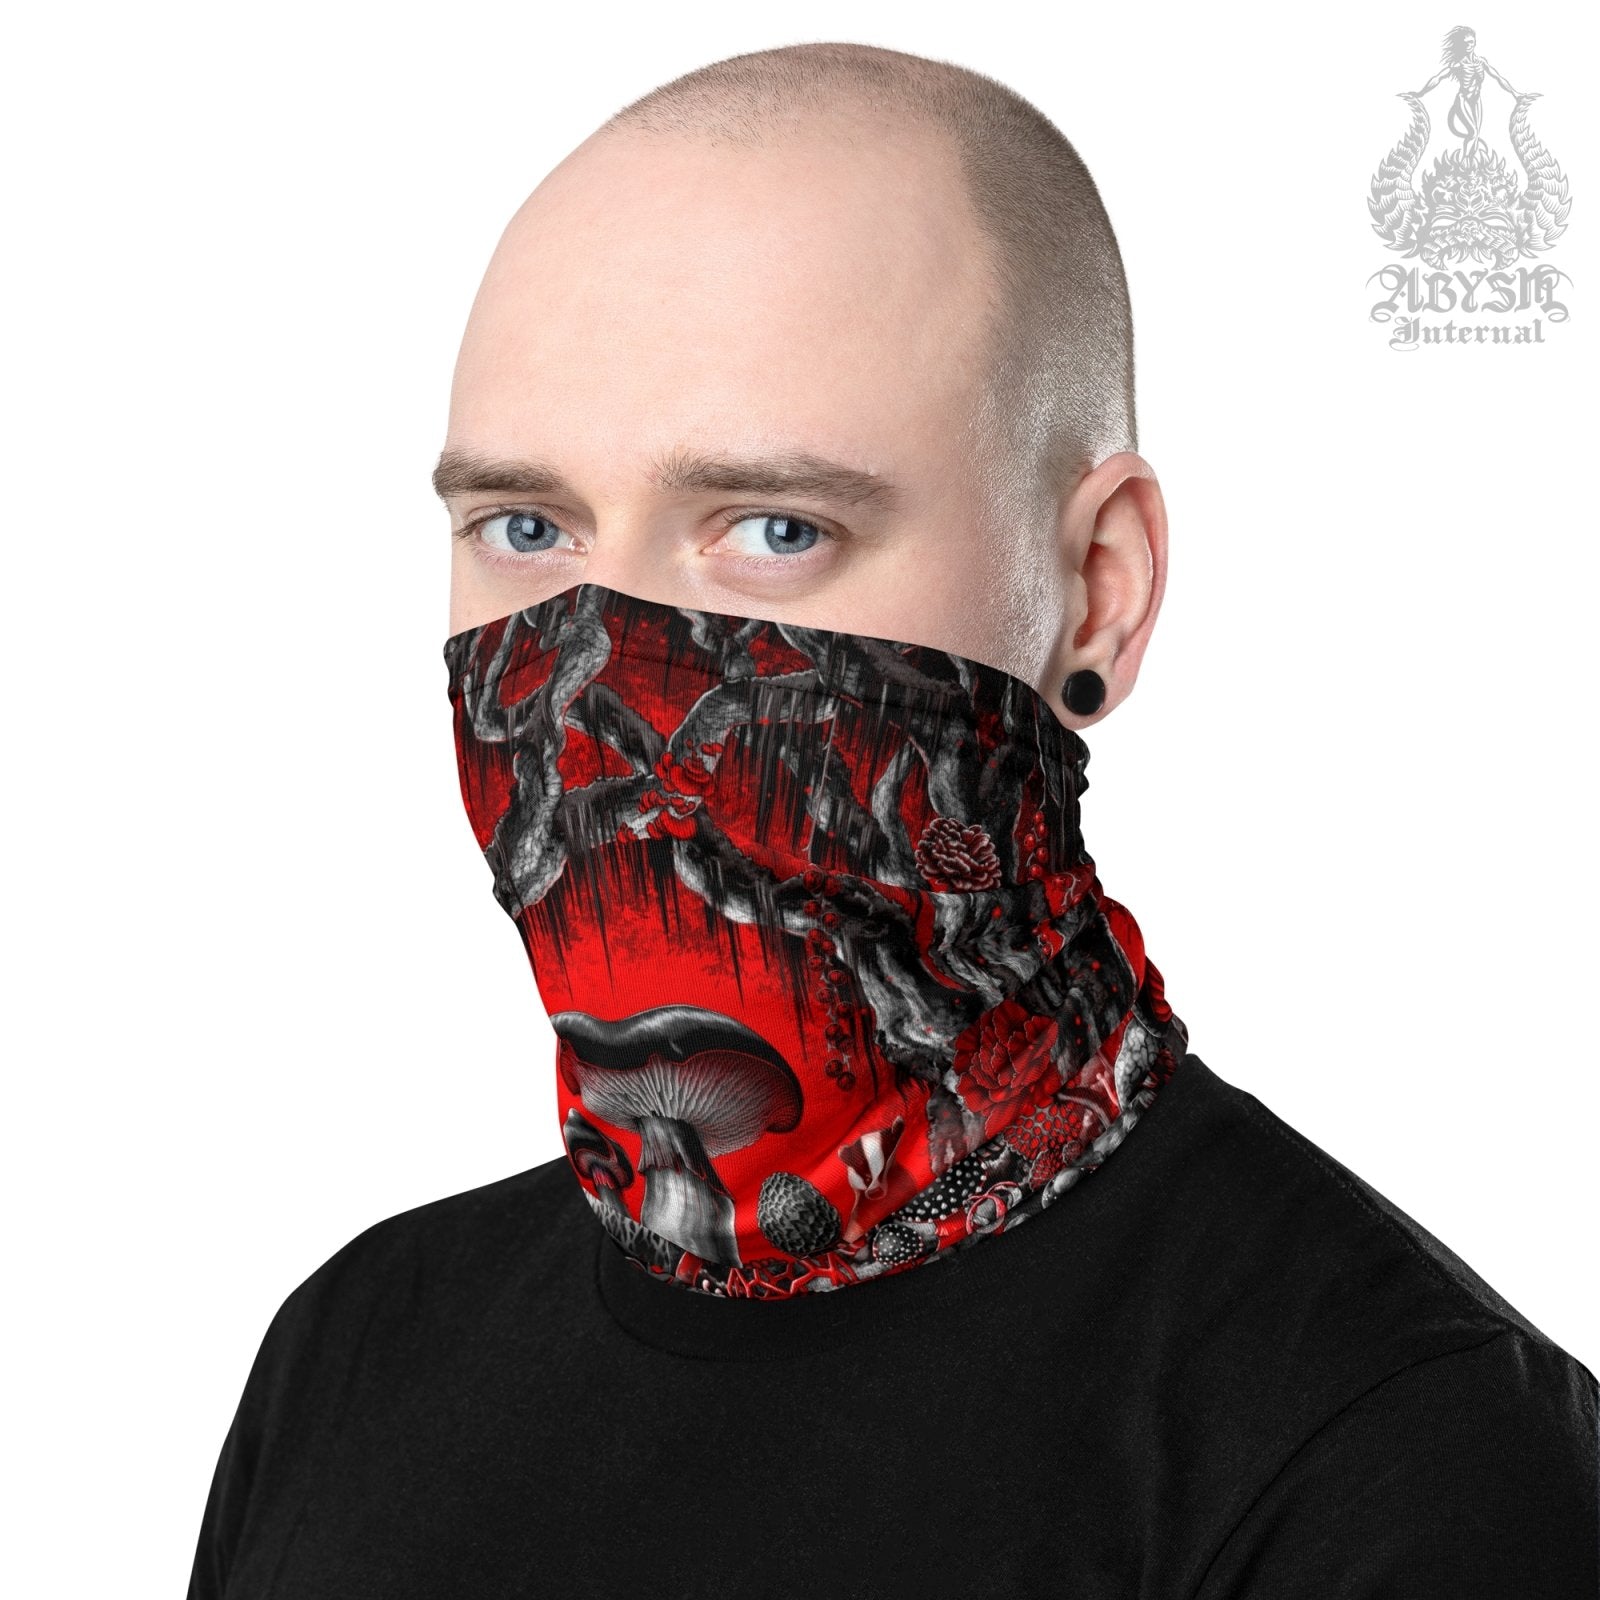 Gothic Mushrooms Neck Gaiter, Bloody Goth Face Mask, Head Covering, Magic Shrooms Art, Indie Festival Outfit, Mycologyst Gift - Vampiric Red - Abysm Internal